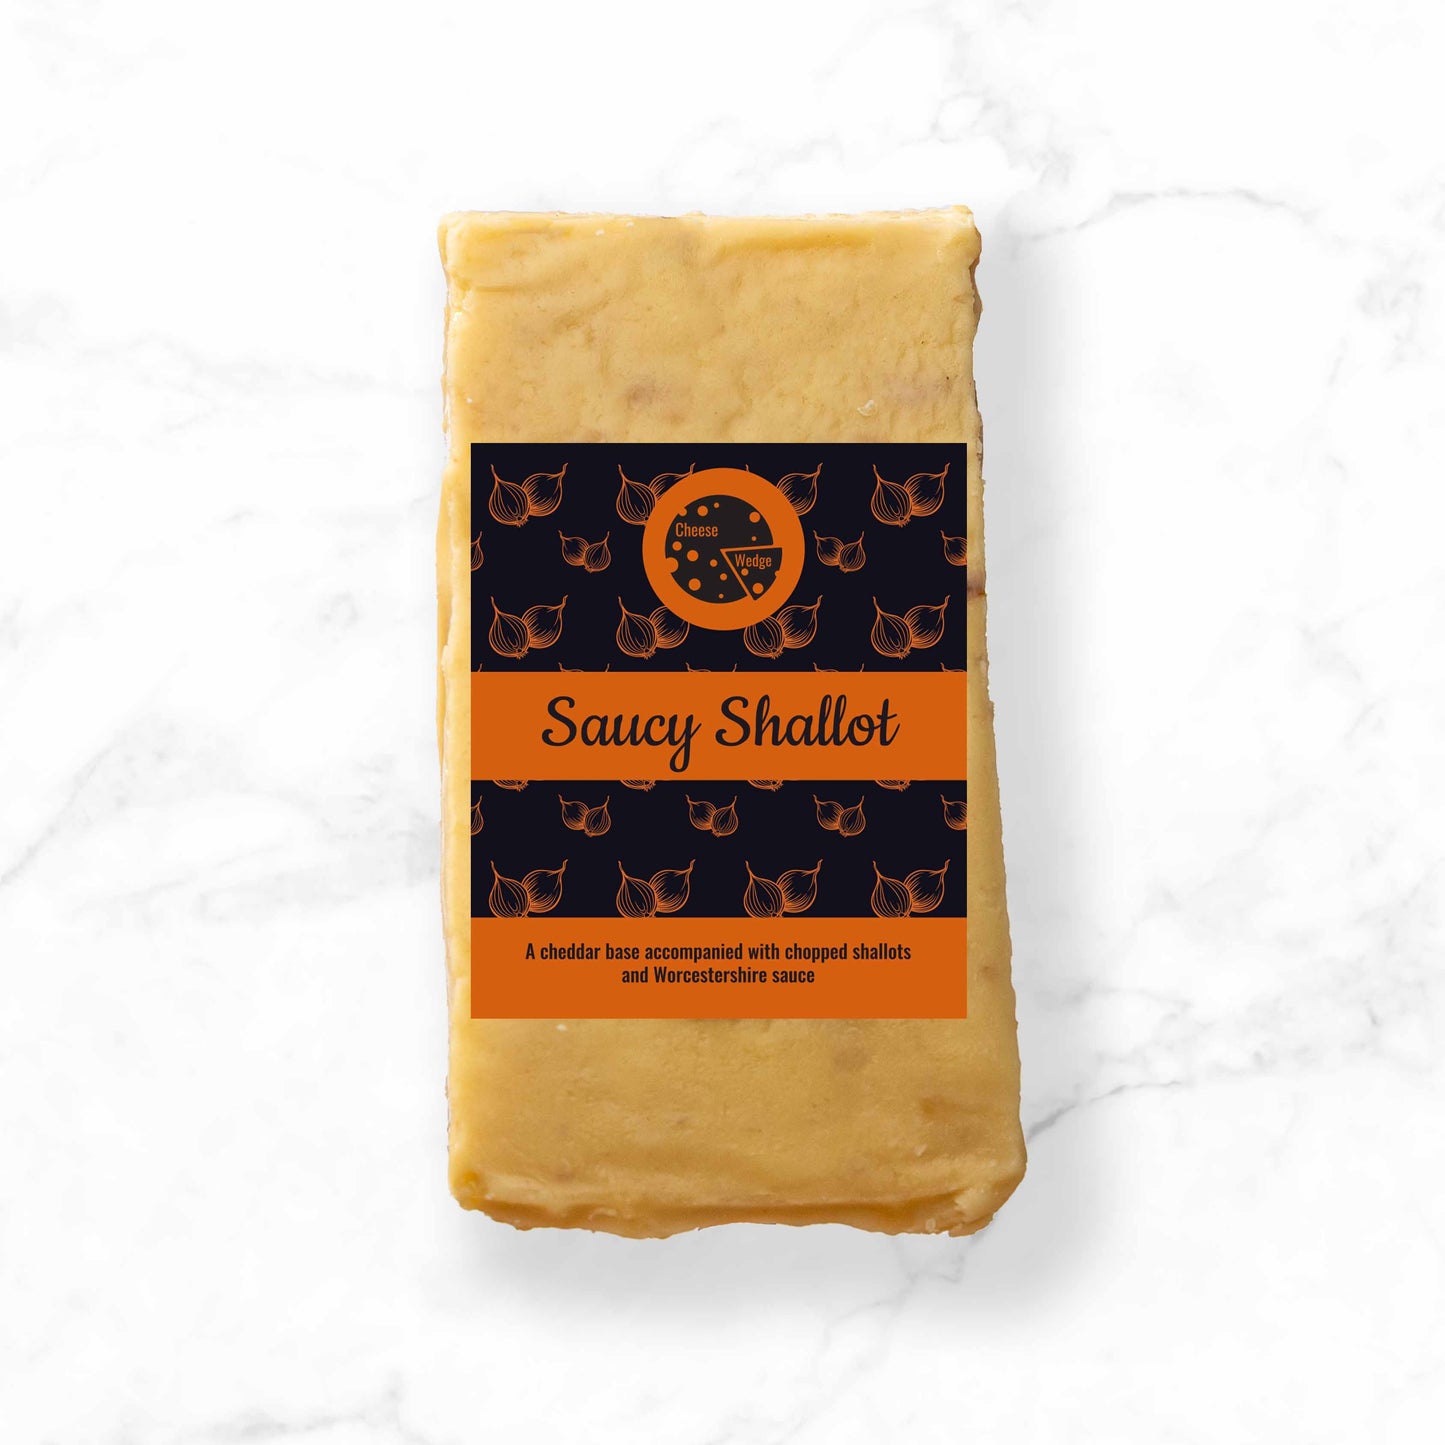 The Cheese Wedge Company Wedge Saucy Shallot